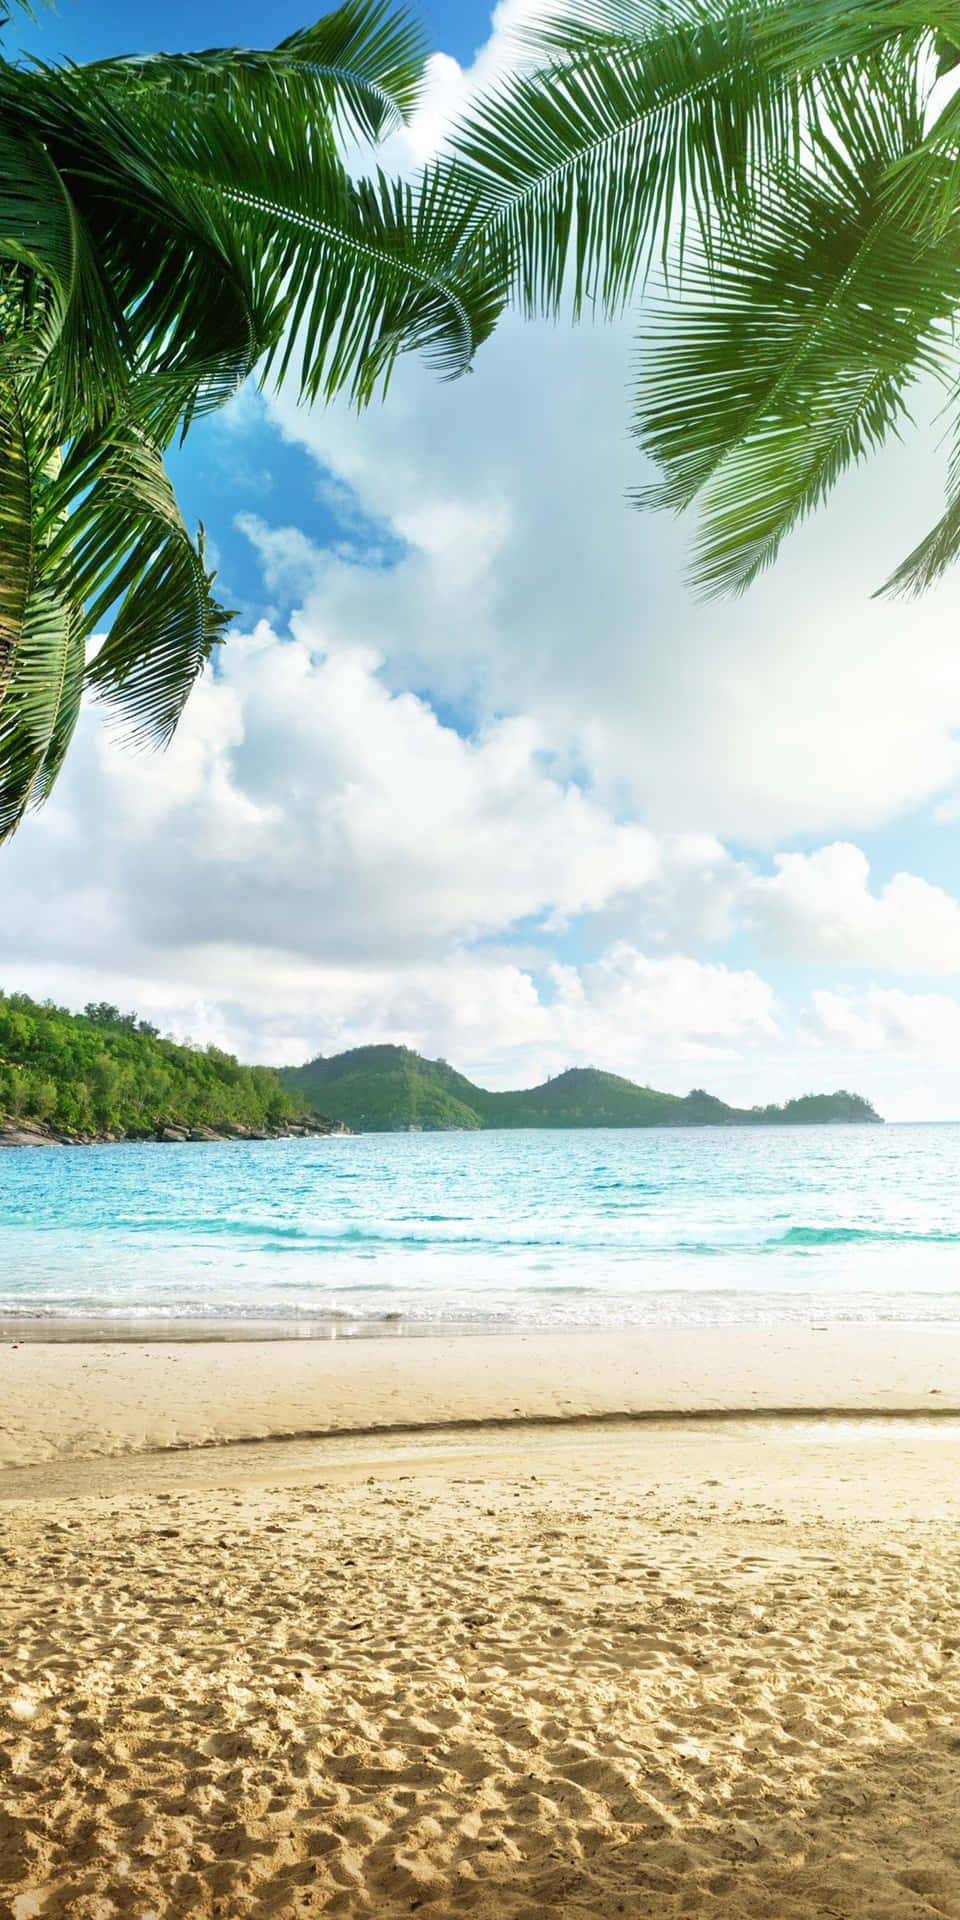 A Tropical Beach With Palm Trees And Water Wallpaper